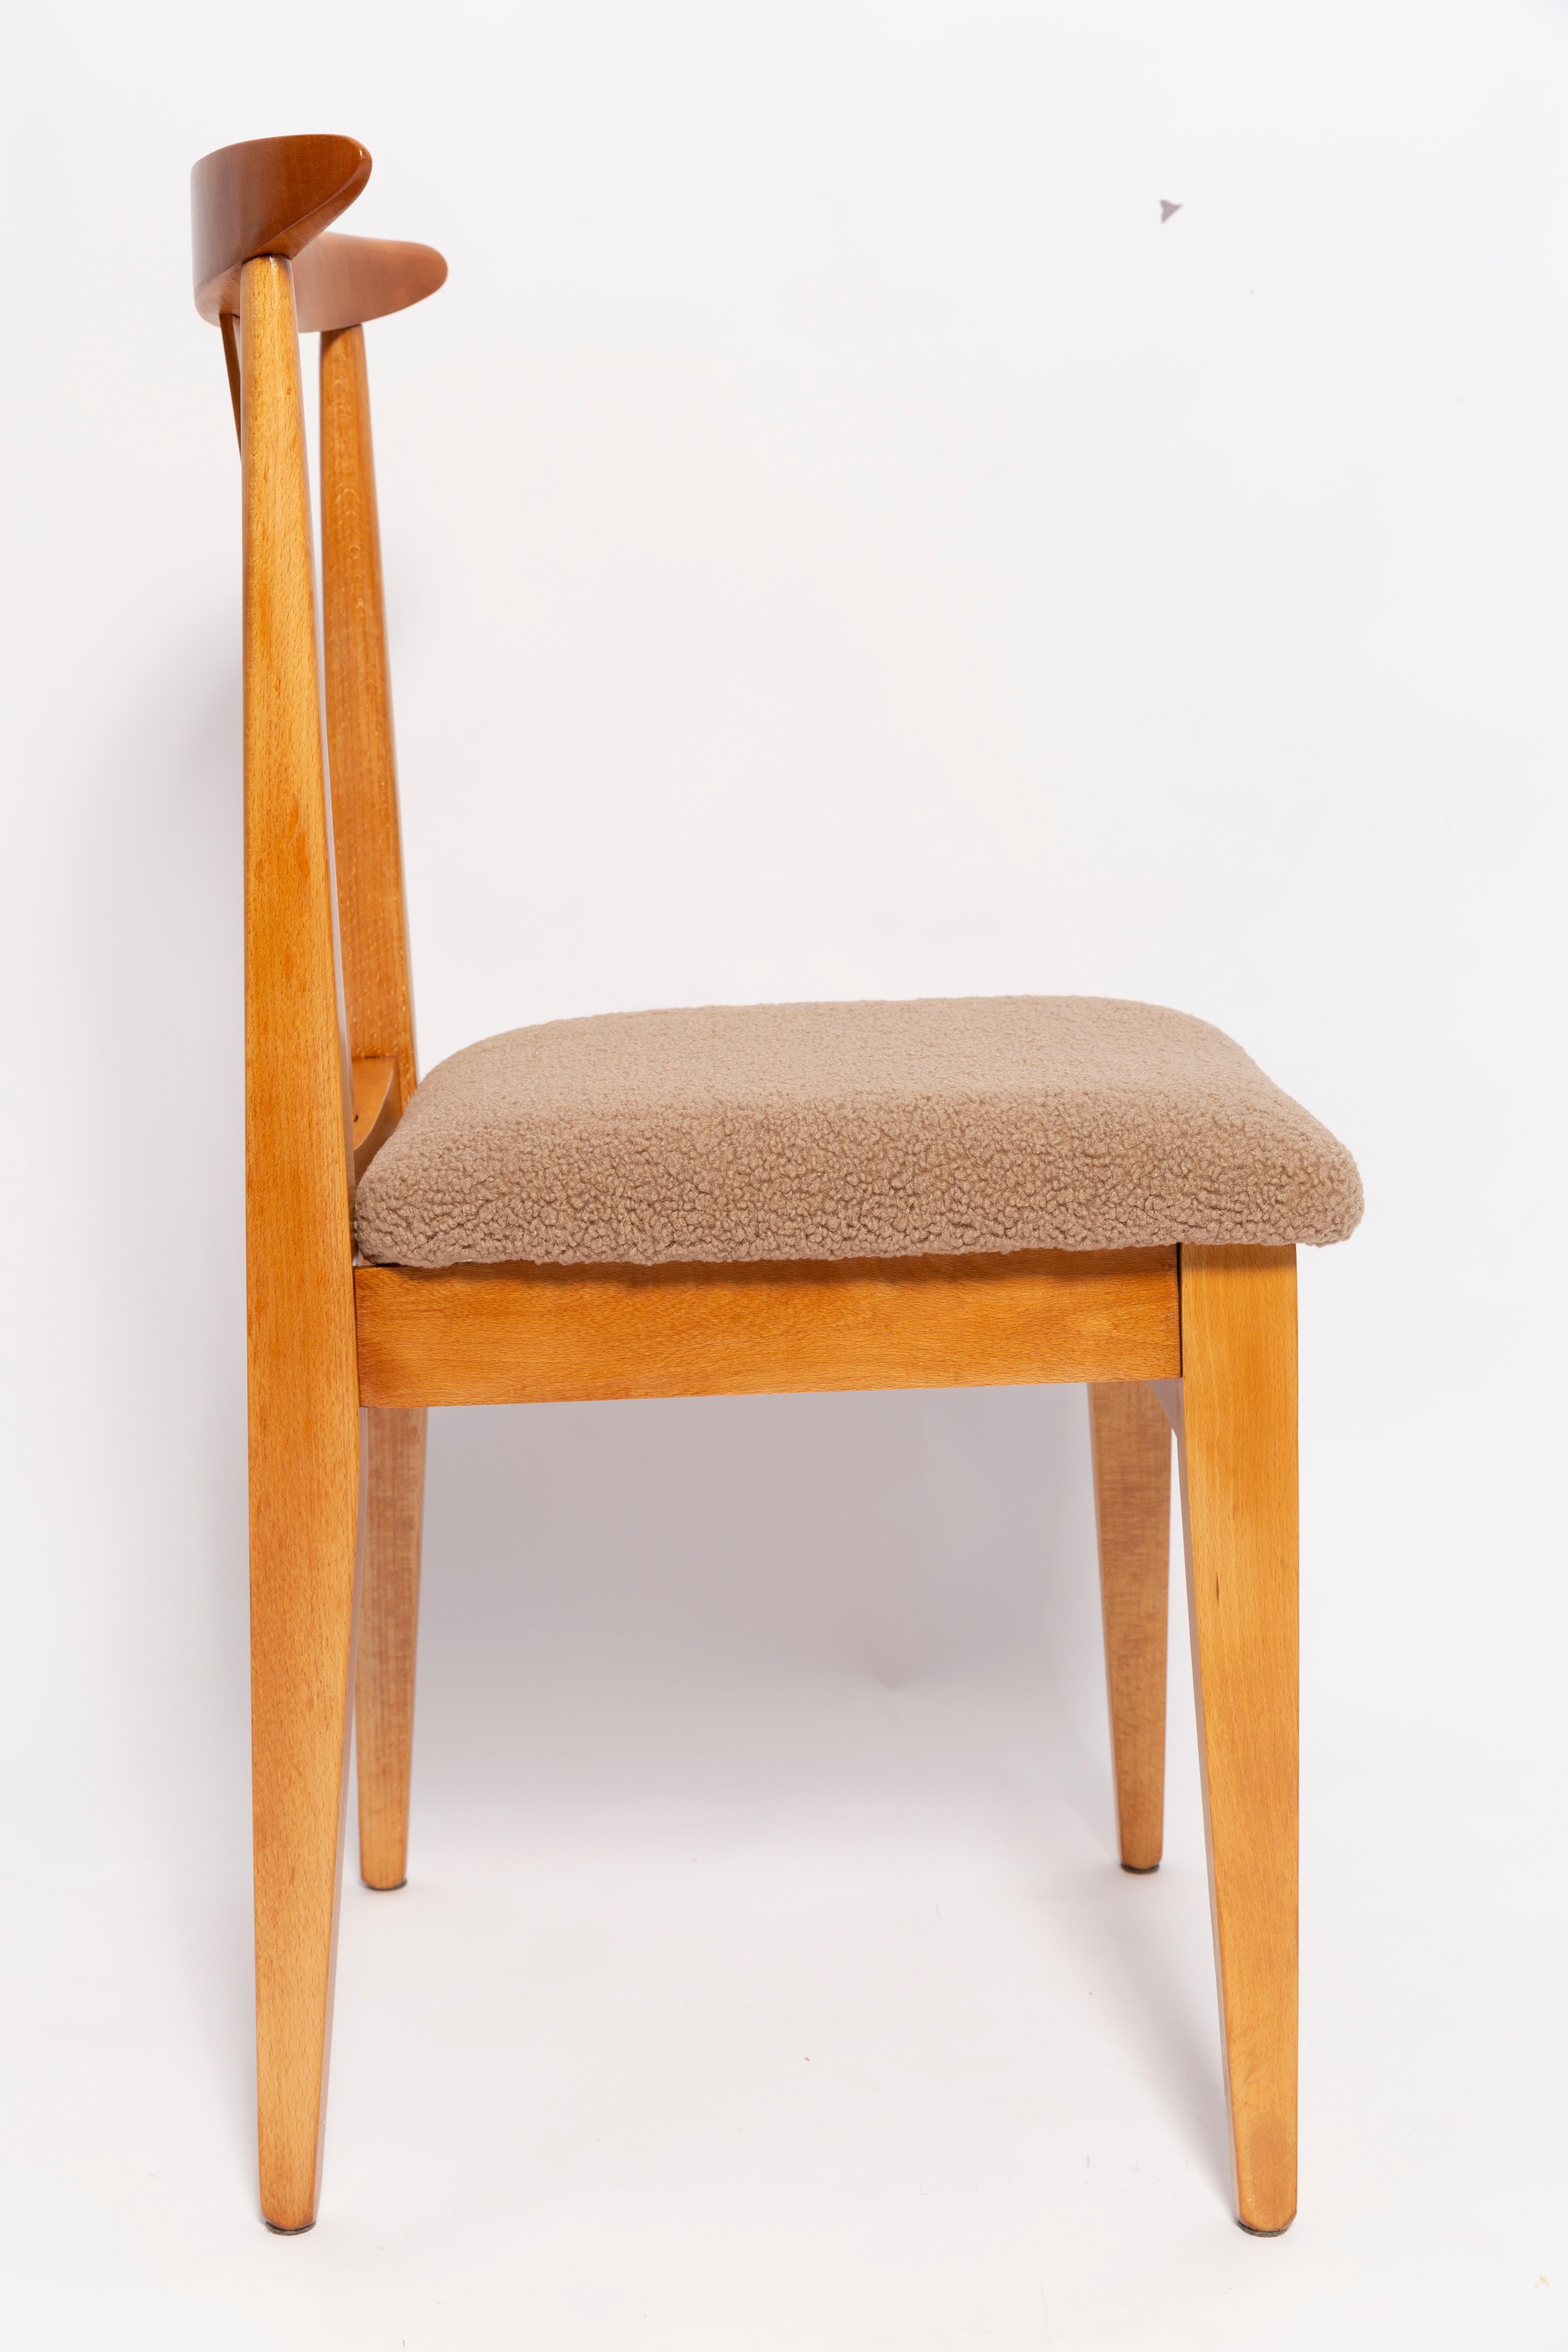 Hand-Crafted Set of 4 Mid-Century Latte Boucle Chairs, Light Wood, M. Zielinski, Europe 1960s For Sale